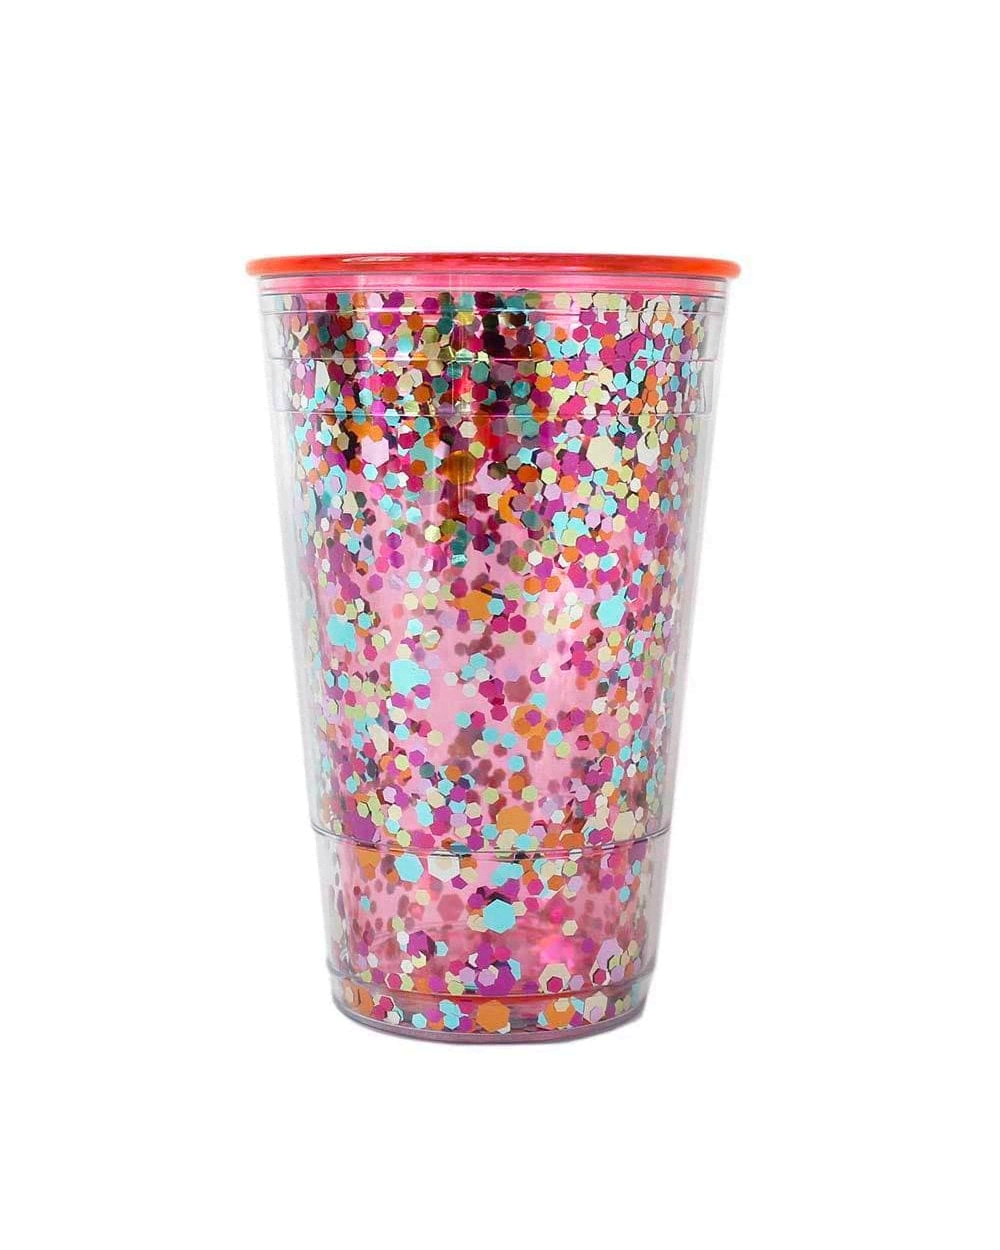 Drink Up Confetti Cup | Packed Party | Iris Gifts & Décor